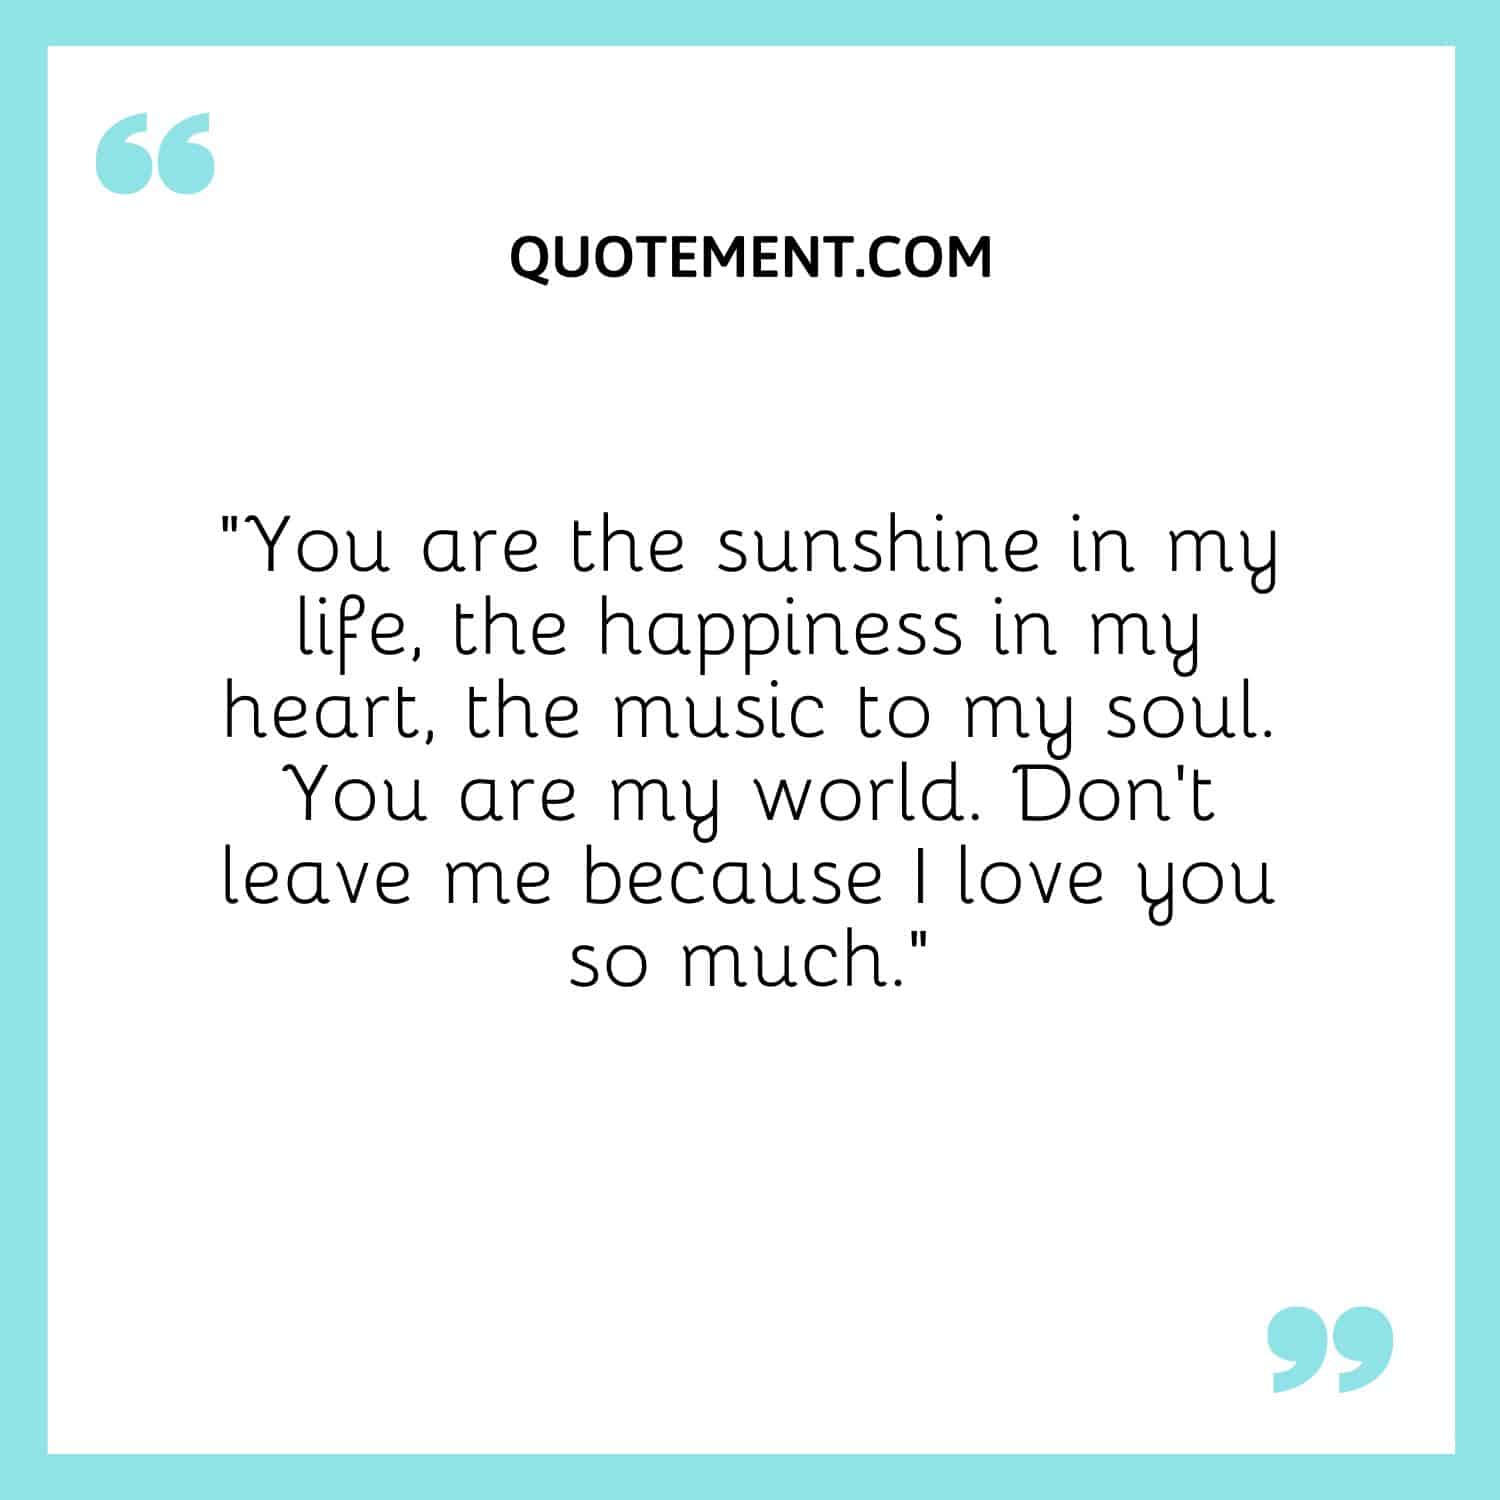 You are the sunshine in my life, the happiness in my heart, the music to my soul